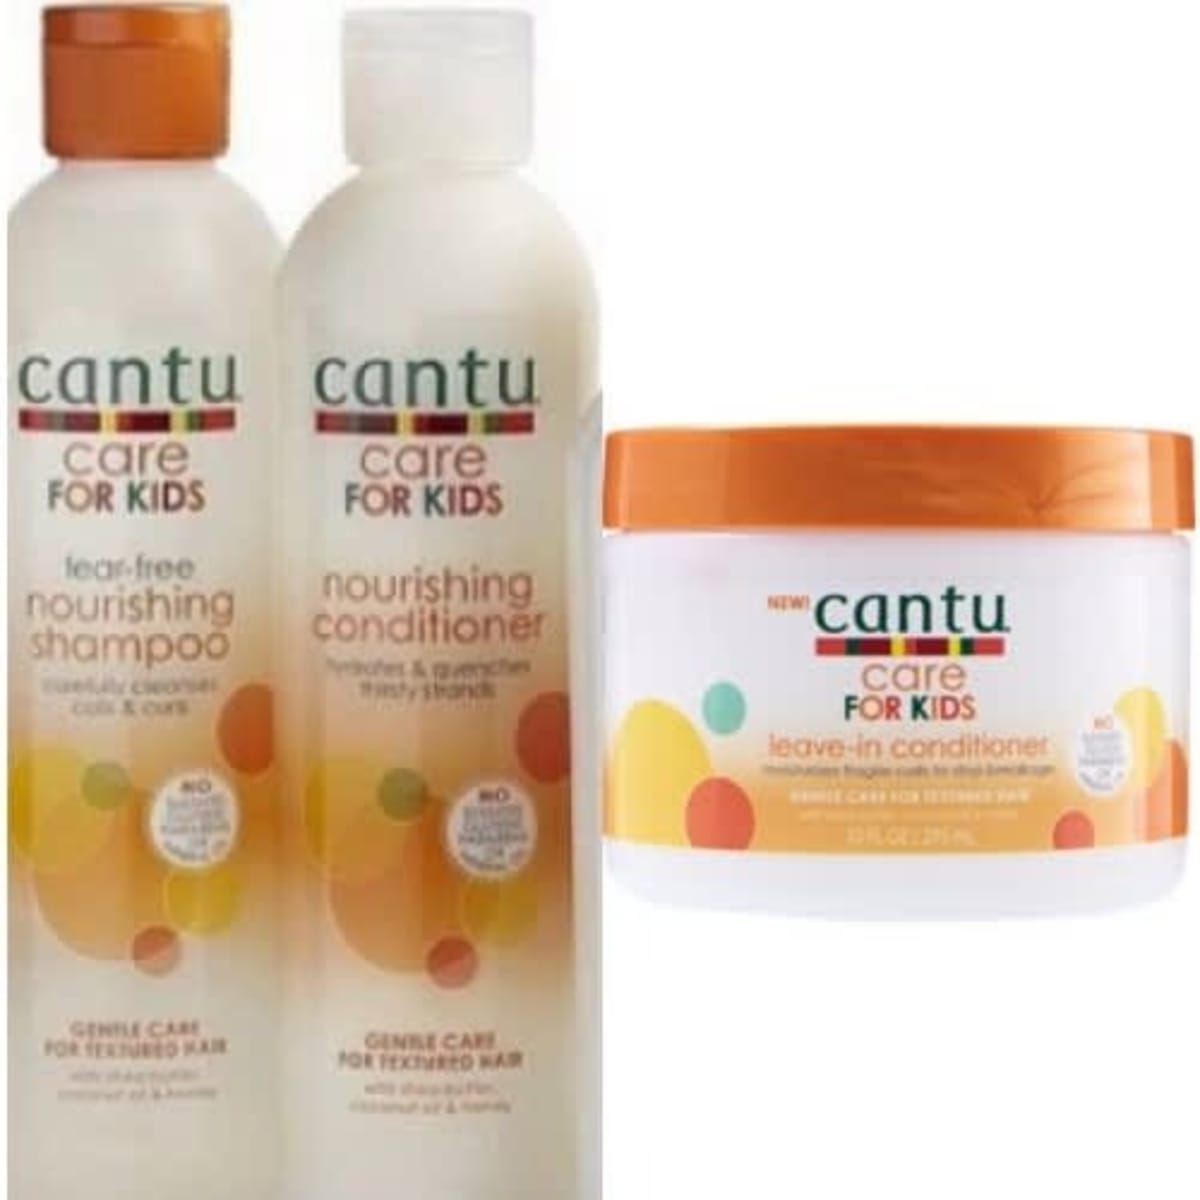 Cantu Care FOR KIDS Gentle Care for TEXTURED HAIR - ALL SET!!